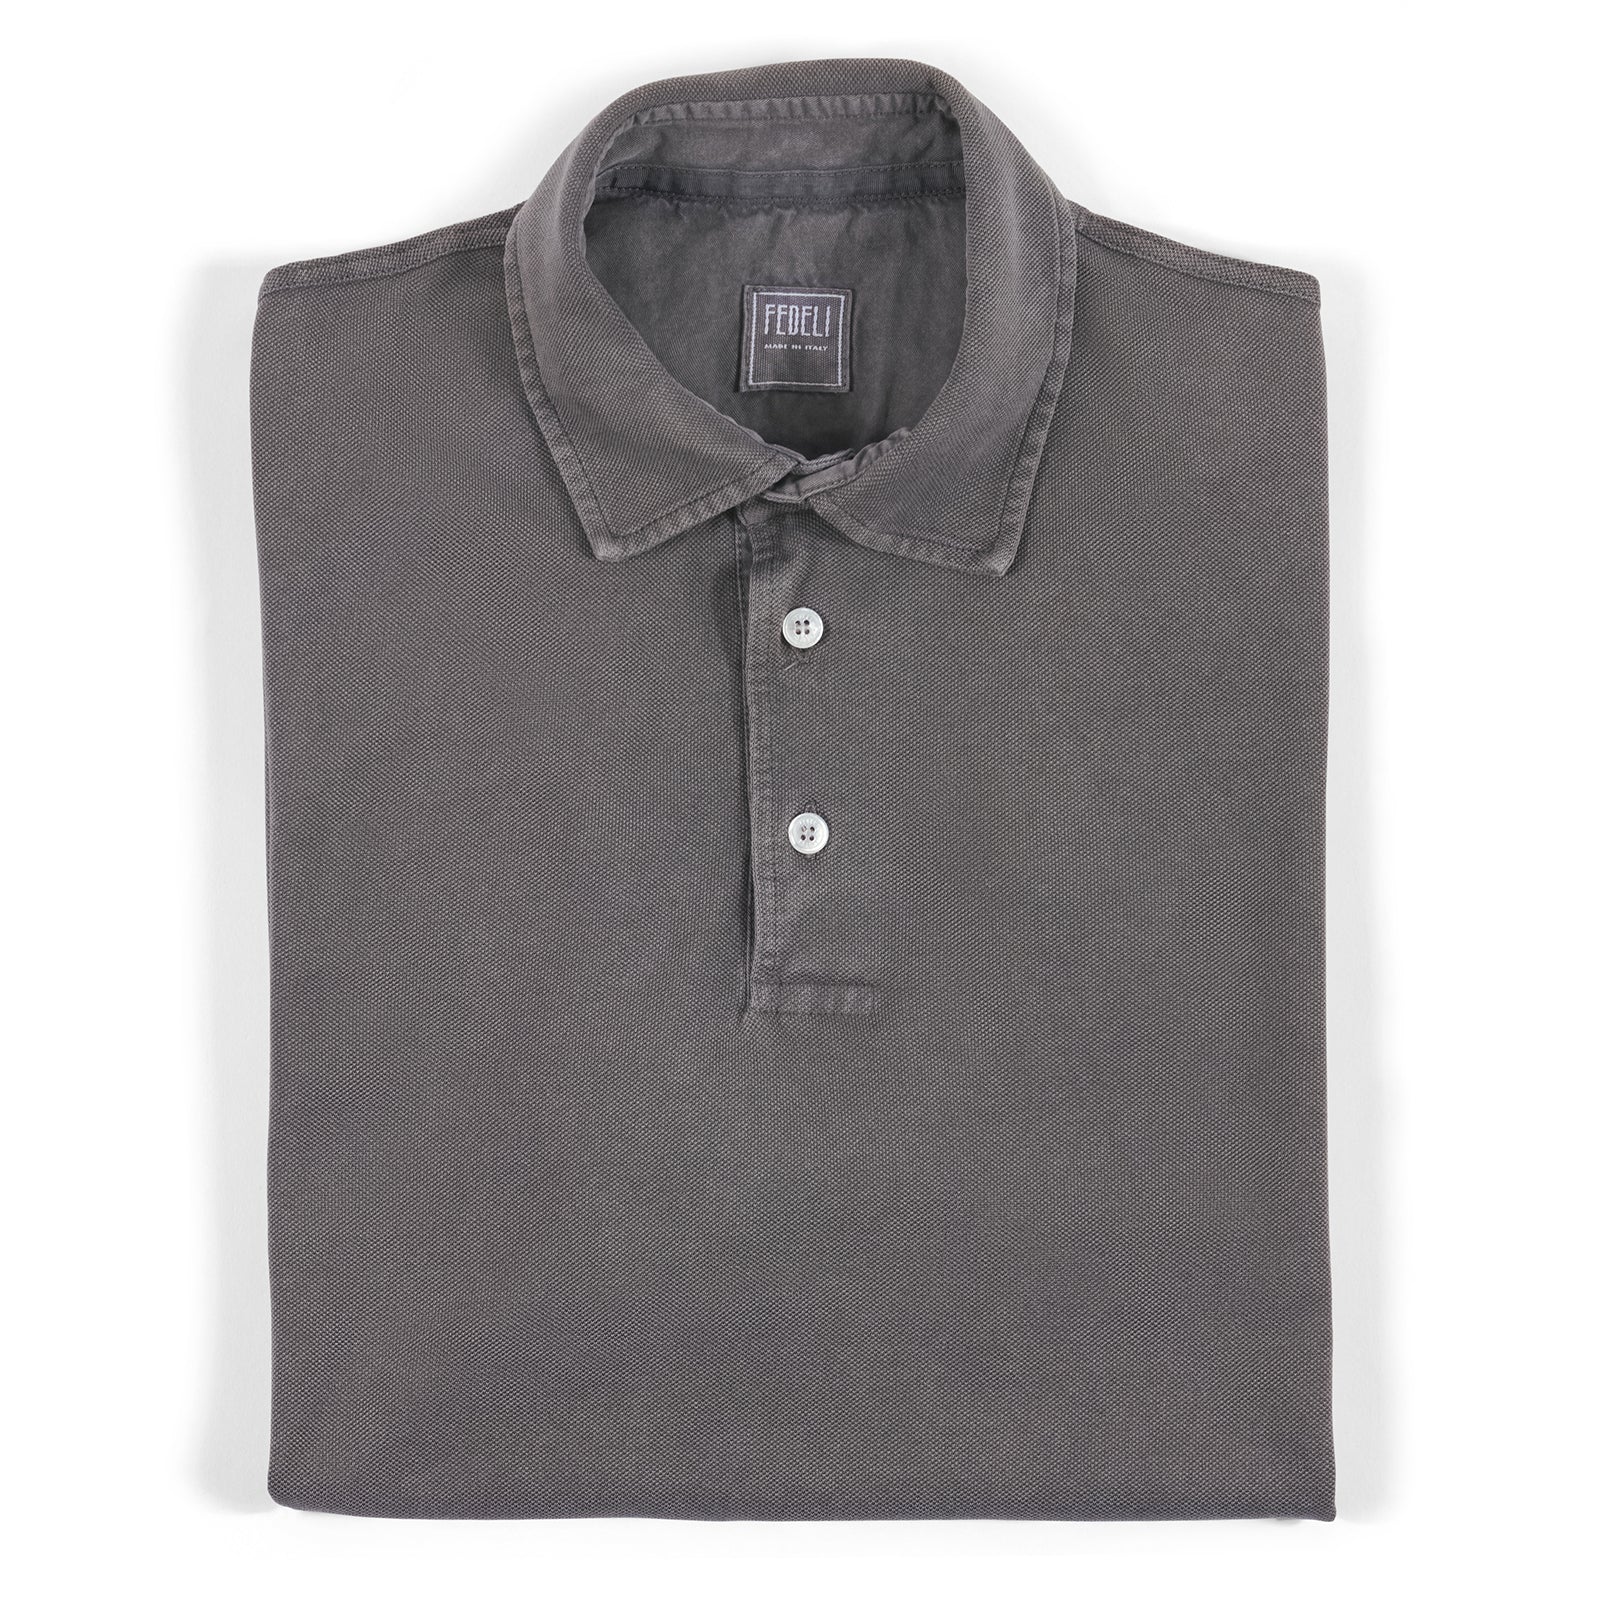 Fedeli Classic Short Sleeve Knitted Piqué Polo Shirt in Stone Grey